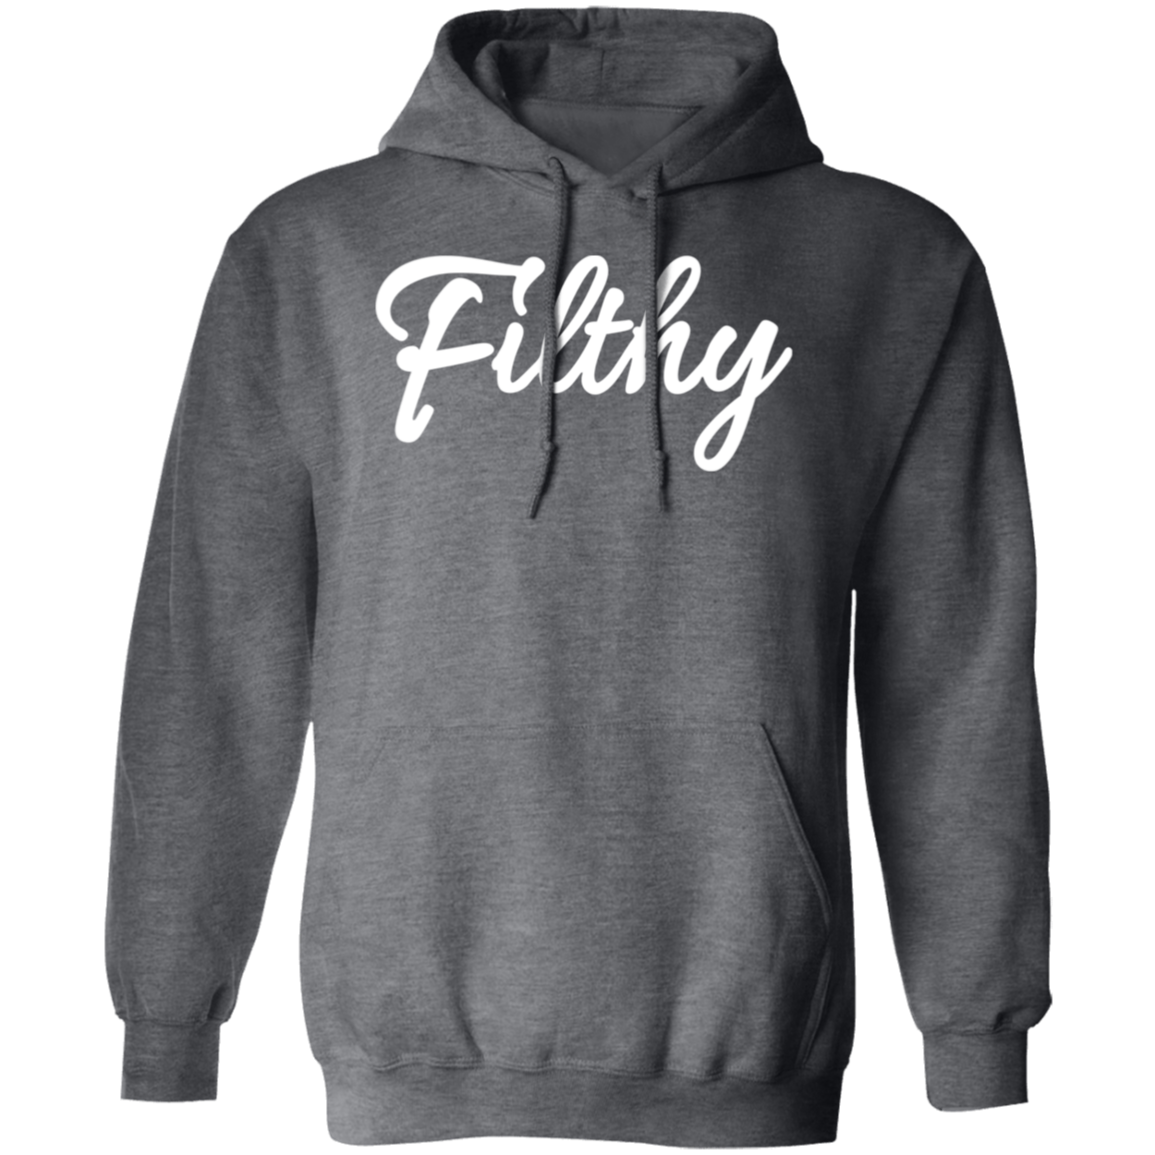 Filthy Premium Unisex Hoodies - Game Day Getup